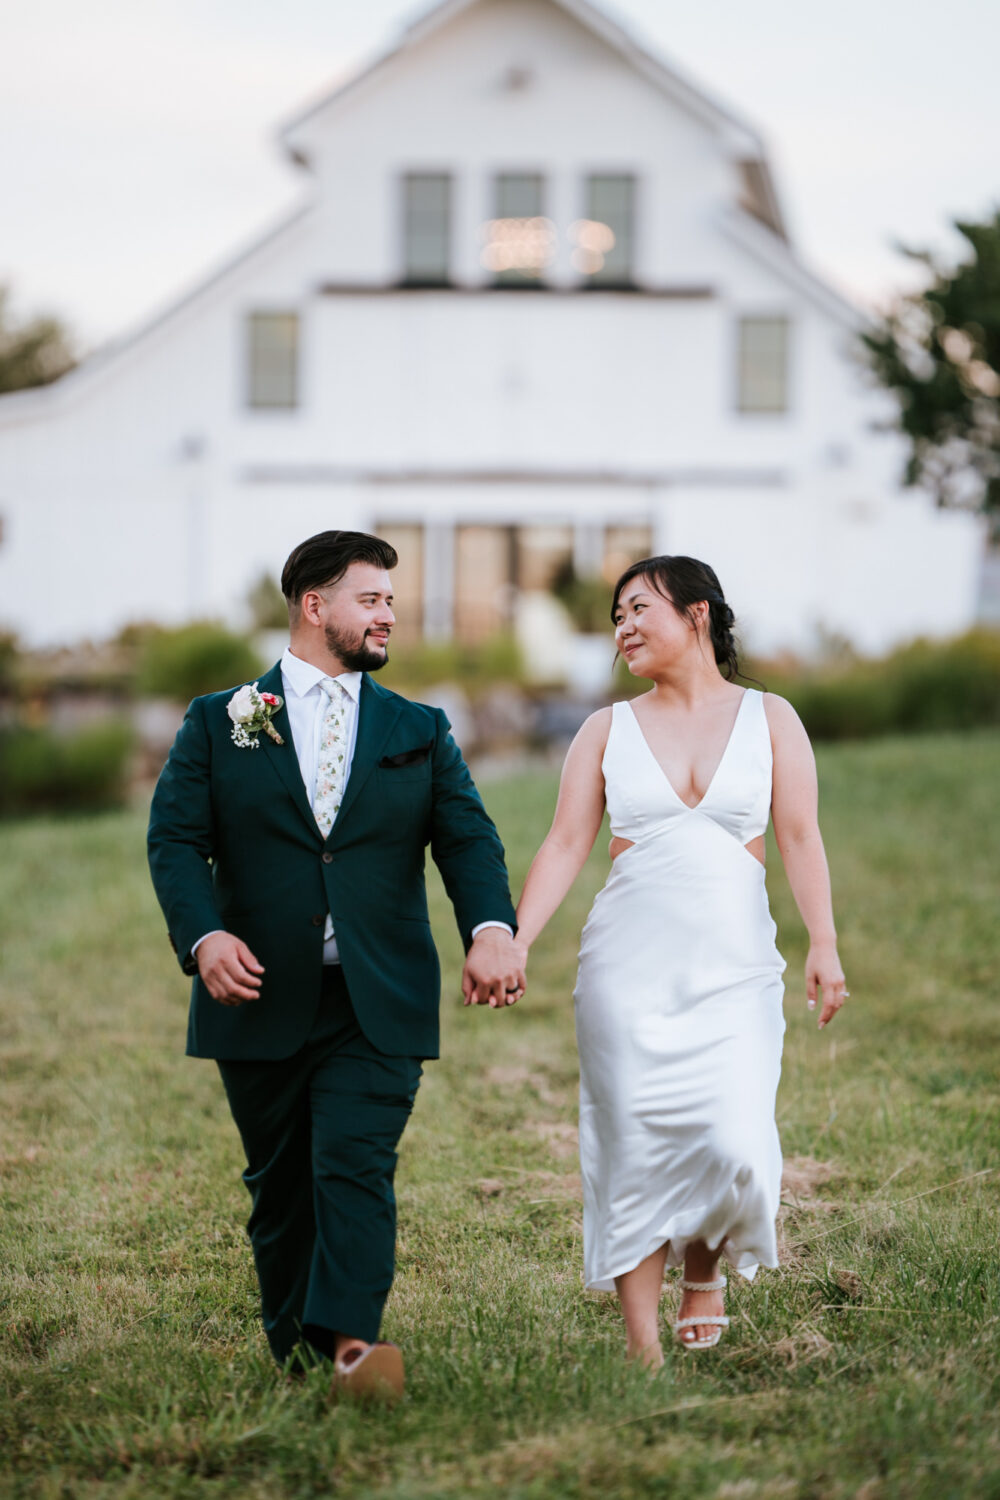 bride and groom walking together during their willow brook wedding day in leesburg, virginia